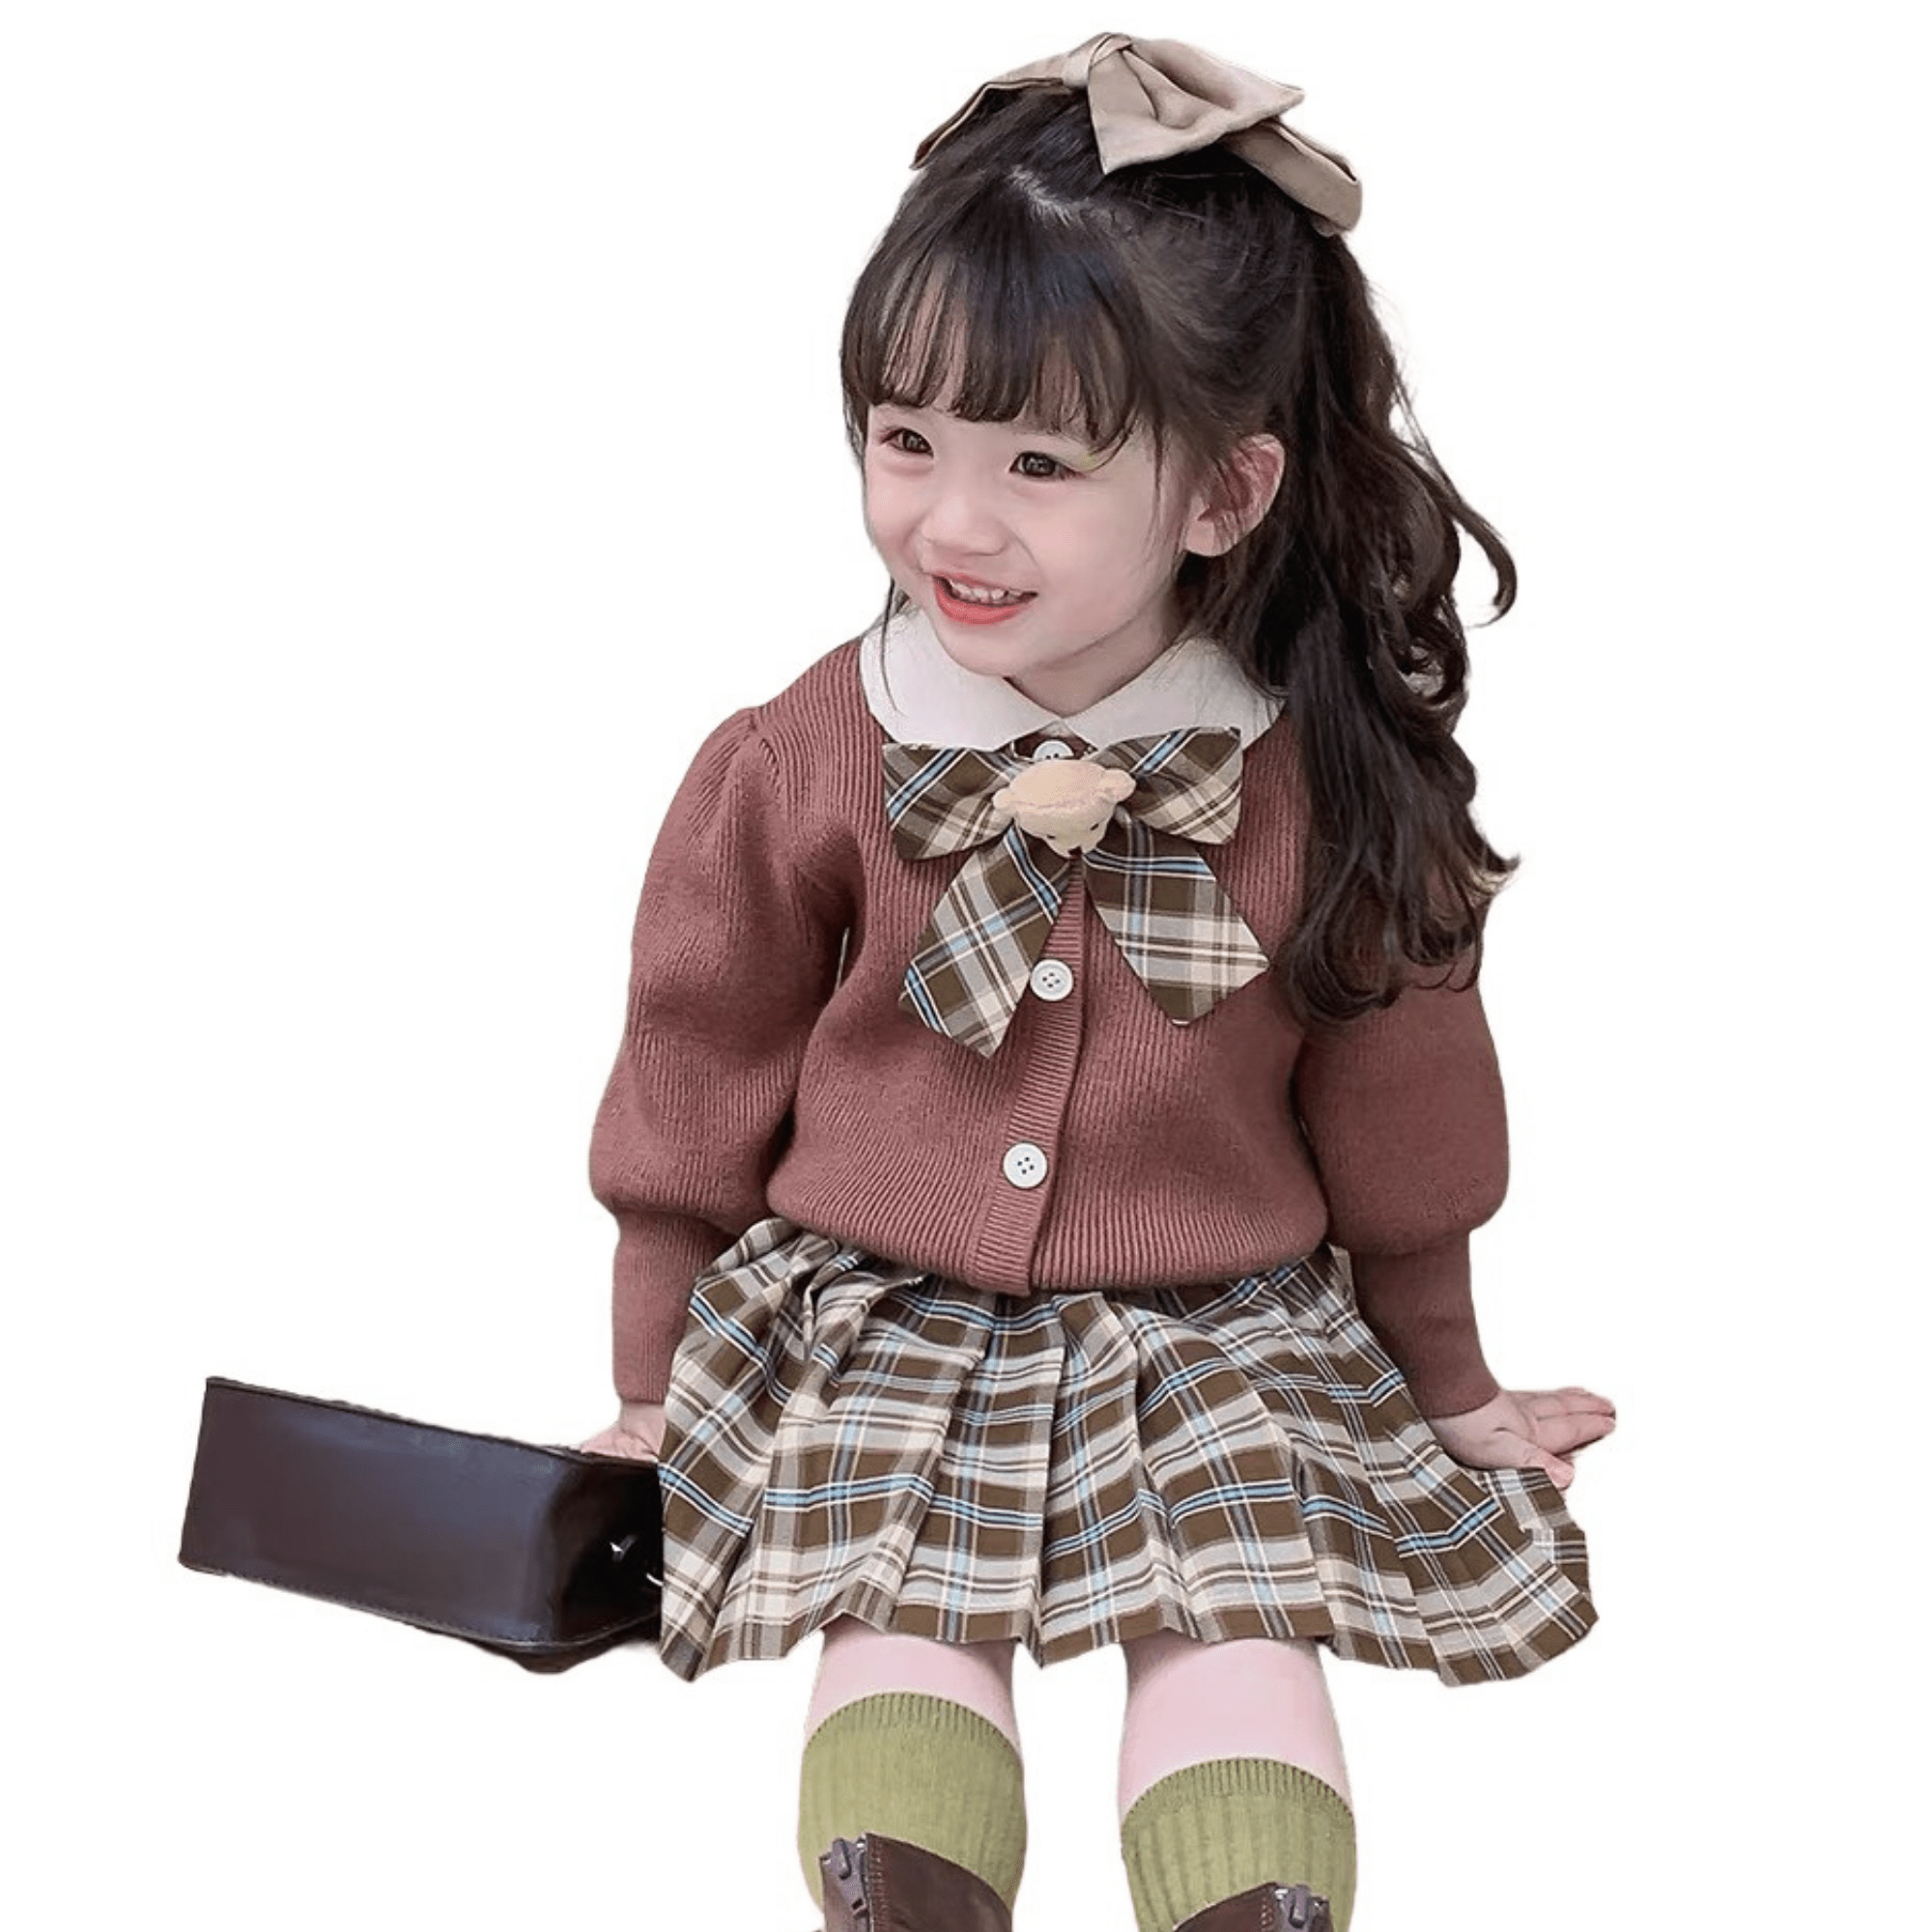 Kids Clothes Girls Customized Service Natural Dresses New Fashion Each One In Opp Bag From Vietnam Manufacturer